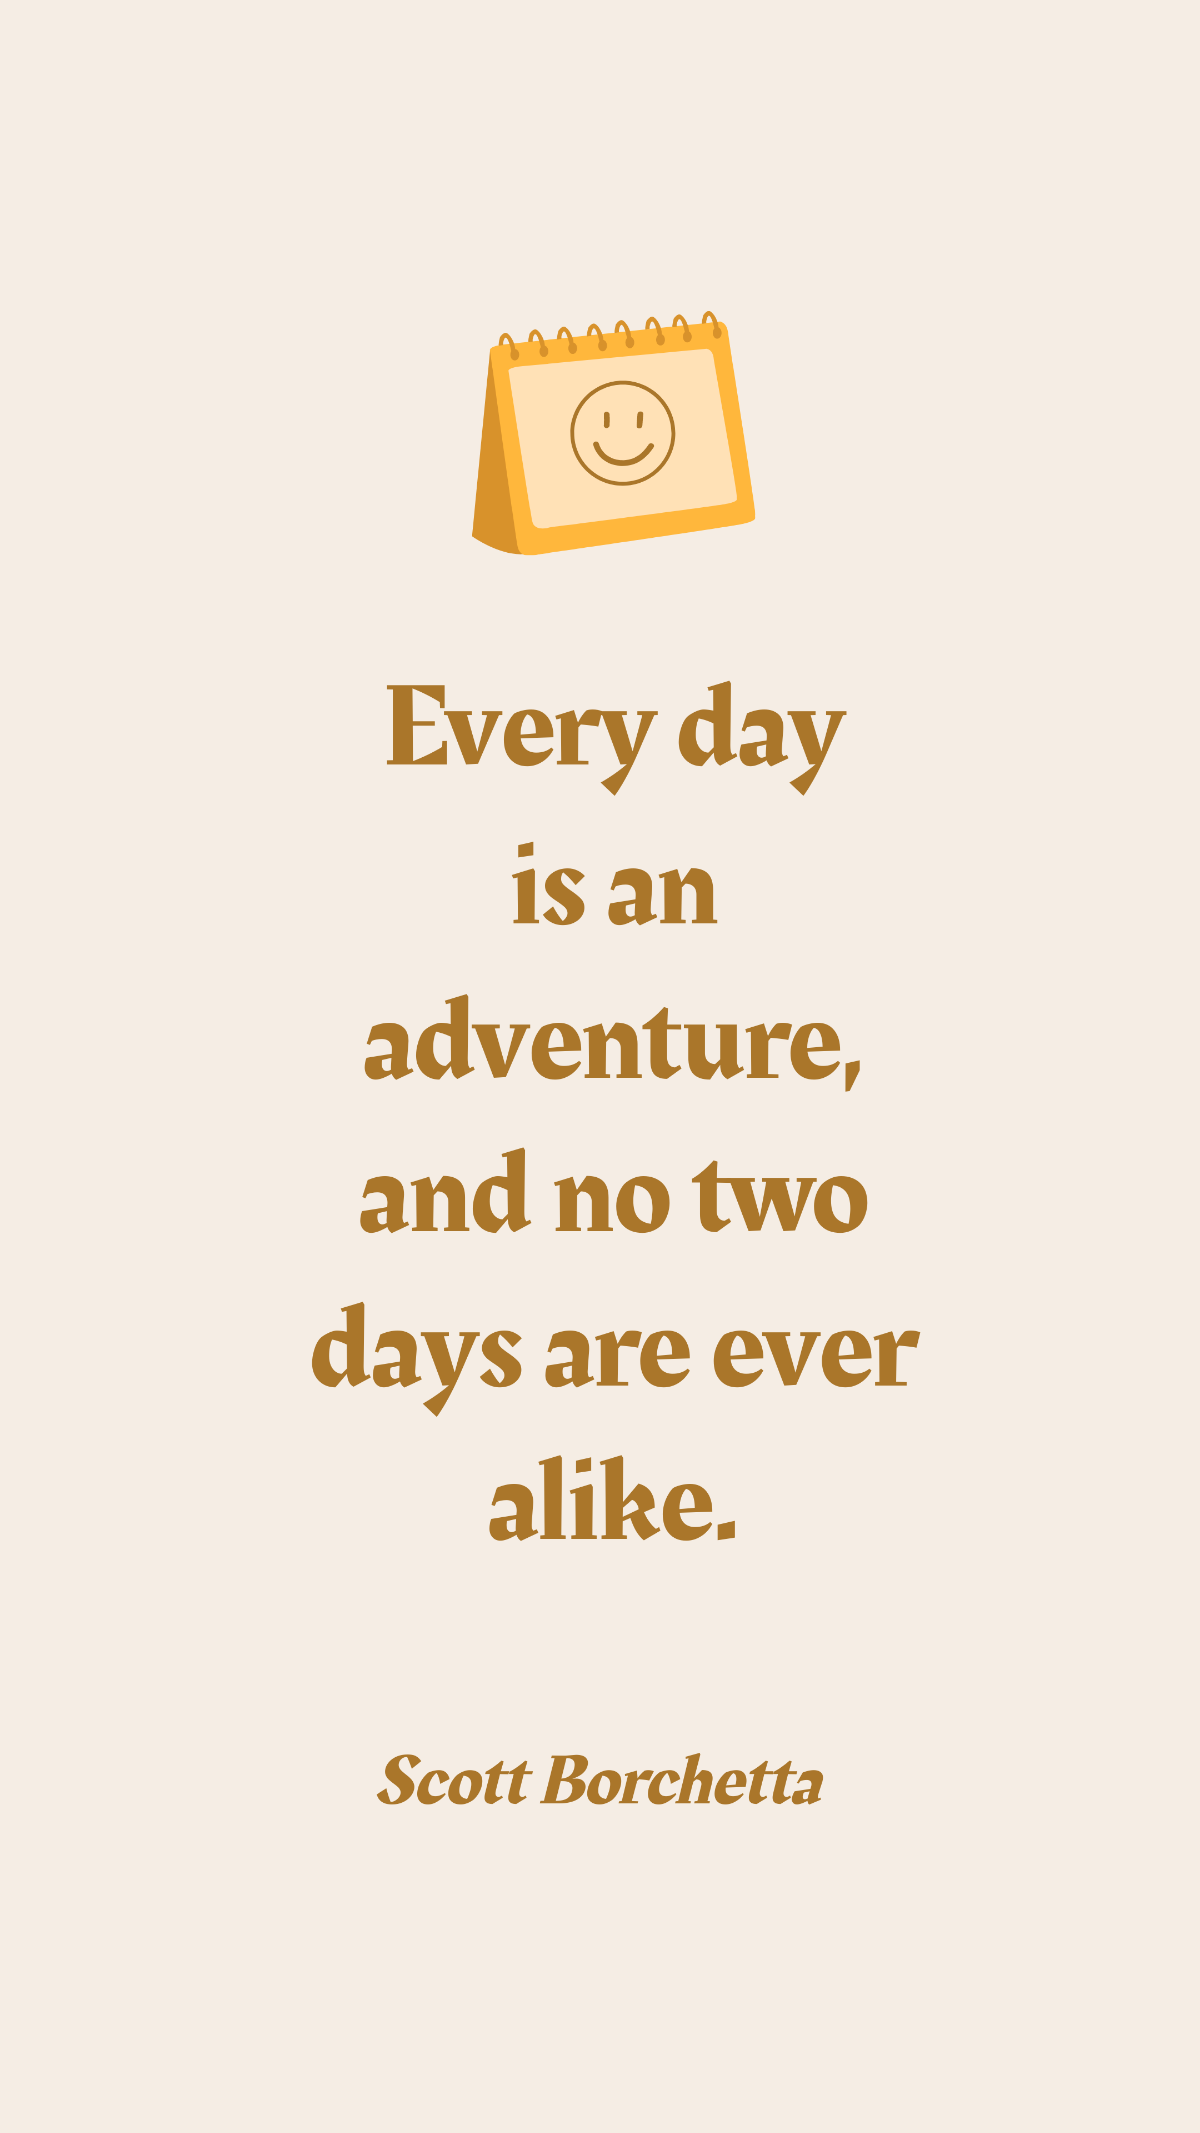 Free Scott Borchetta - Every day is an adventure, and no two days are ever alike. Template